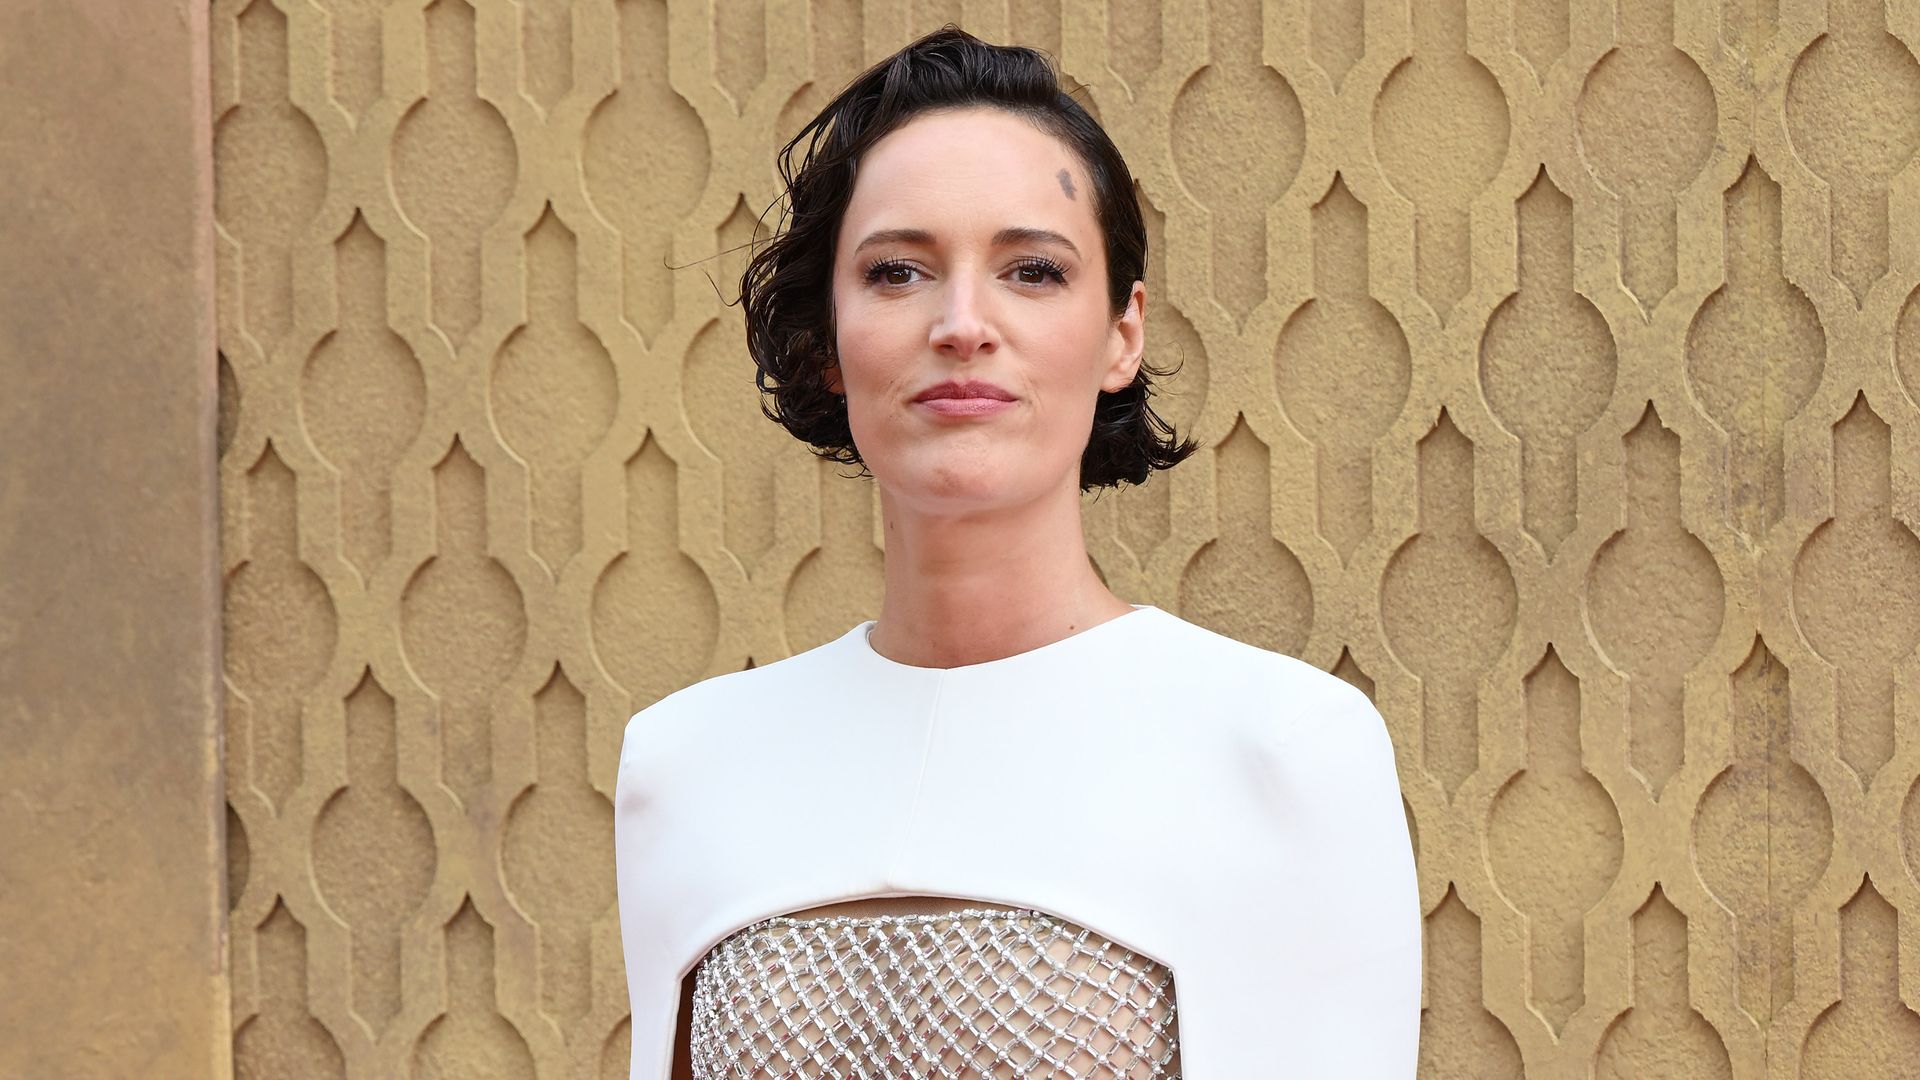 Phoebe Waller-Bridge in a shiny lattice dress with a white cape overlay at the Indiana Jones premiere